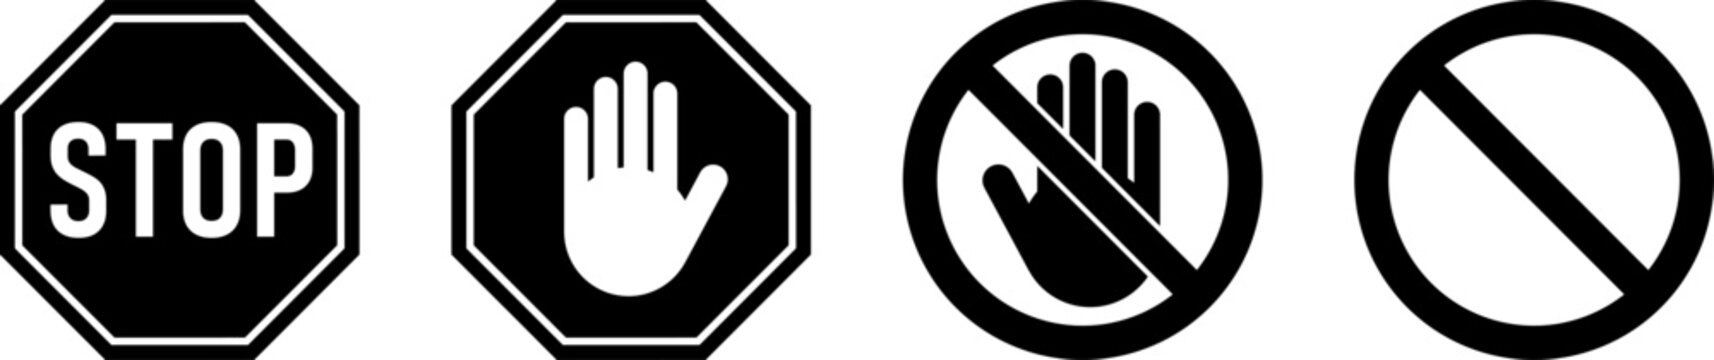 Icon Set of Black and White Stop Sign and Stop Hand Adblock Octagonal Symbol. Vector Image.	
